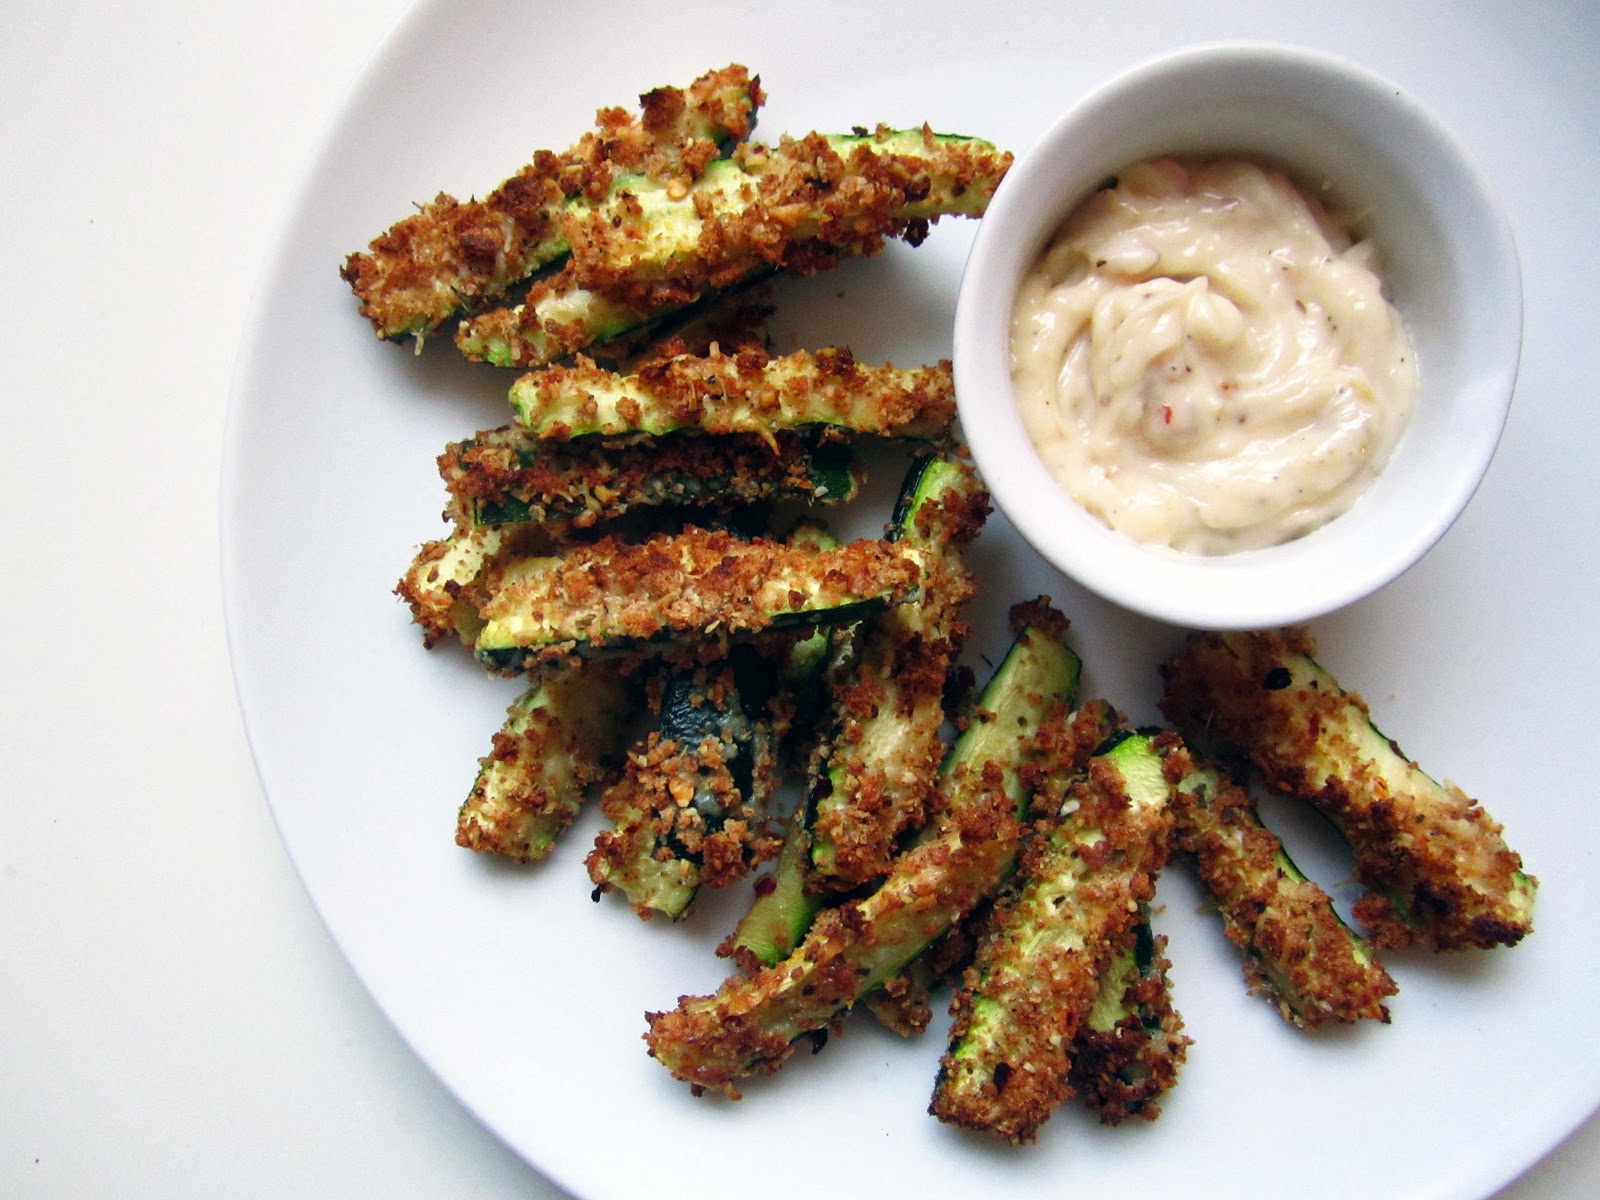 I'm Sorry to Make You Feel Old, But Only Millennials Ha… Quiz 8 courgette fries